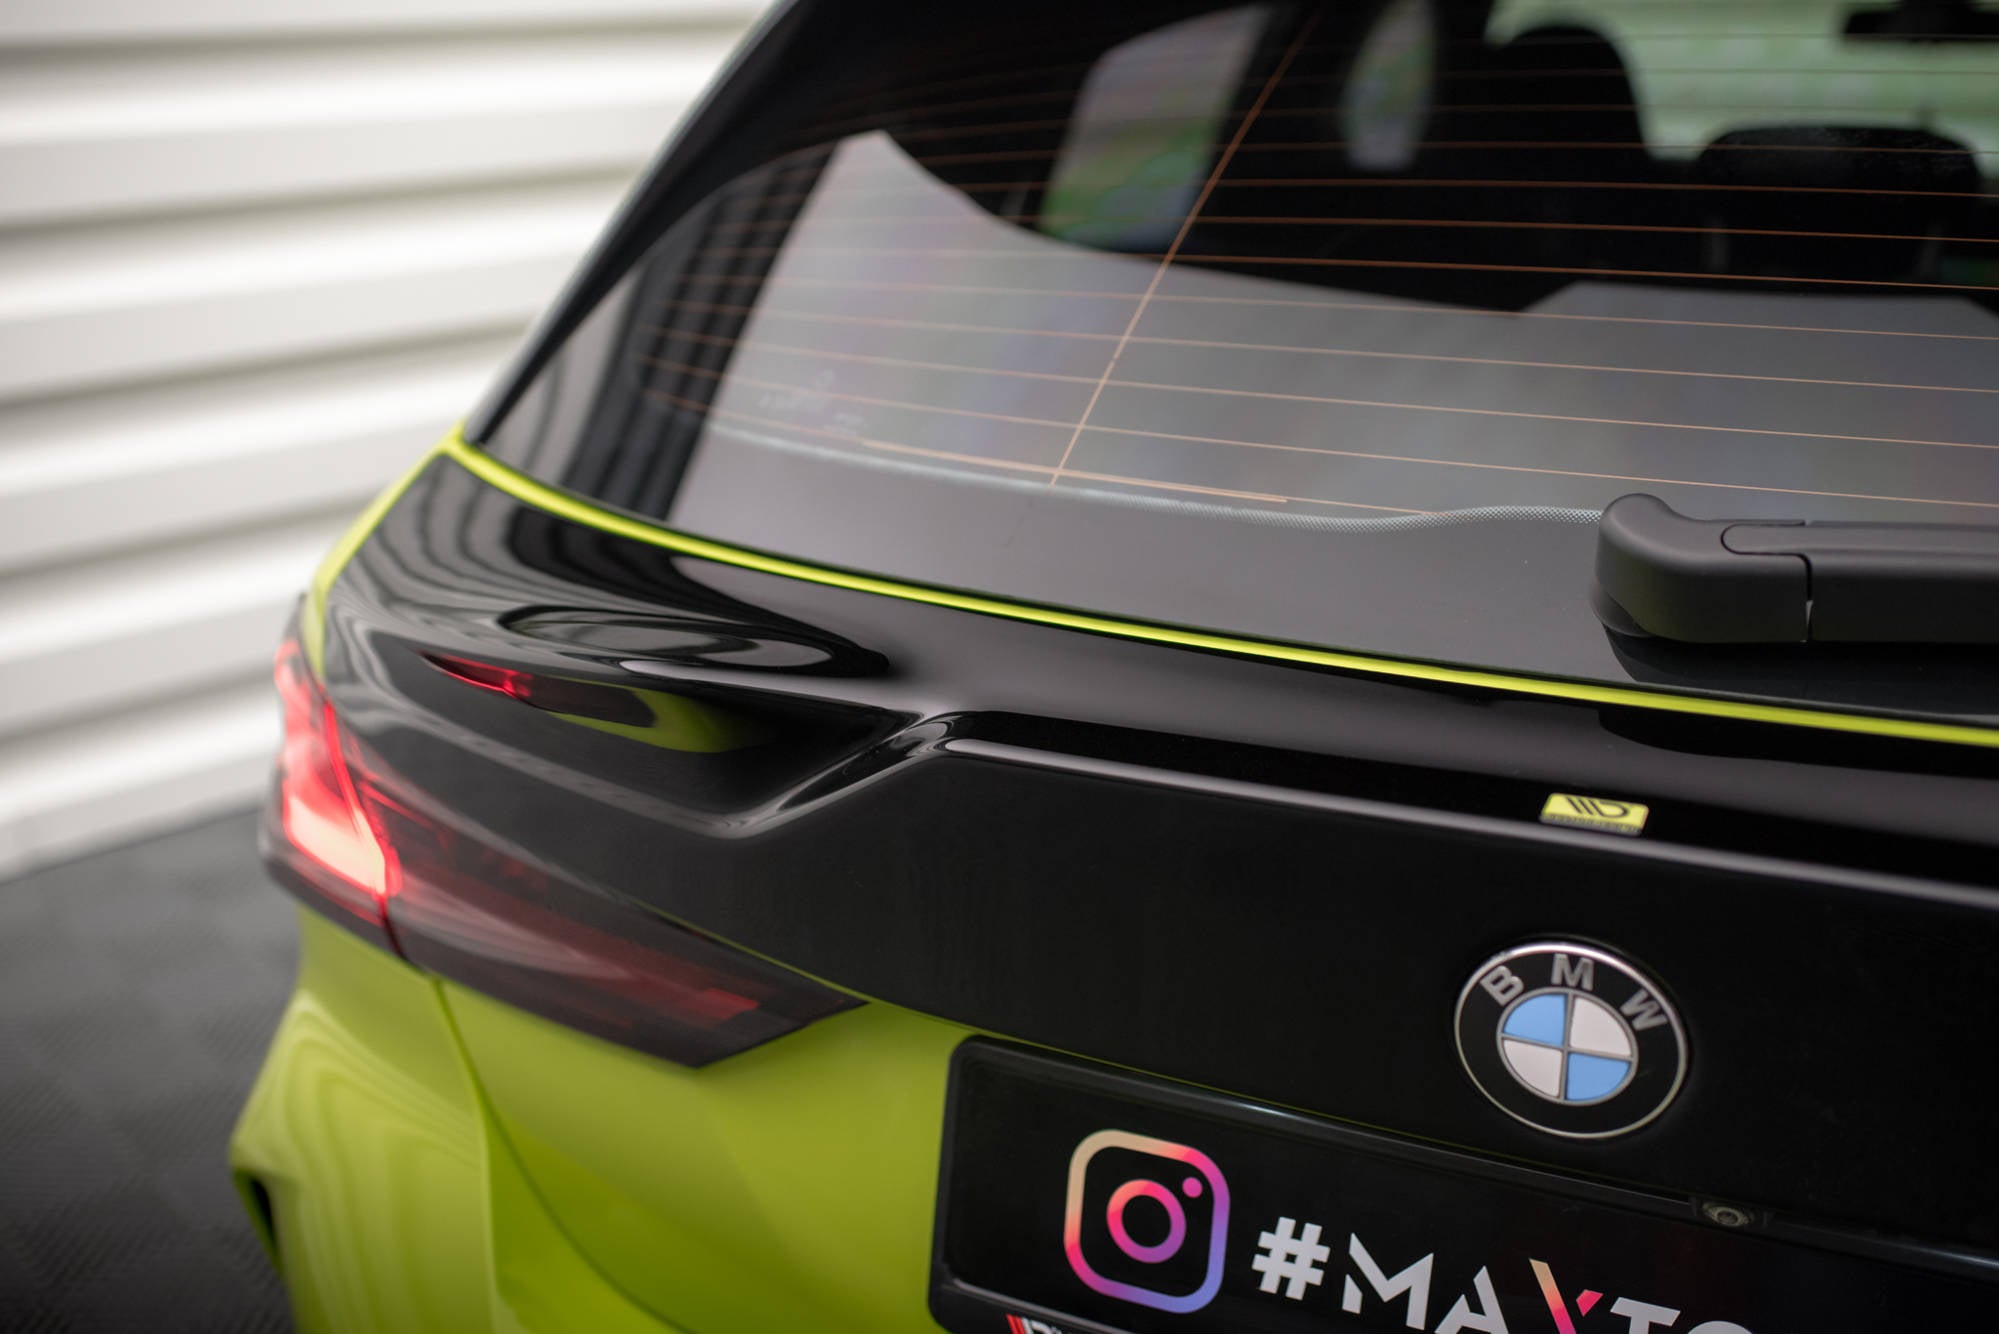 The extension of the rear window BMW 1 F40 M-Pack / M135i